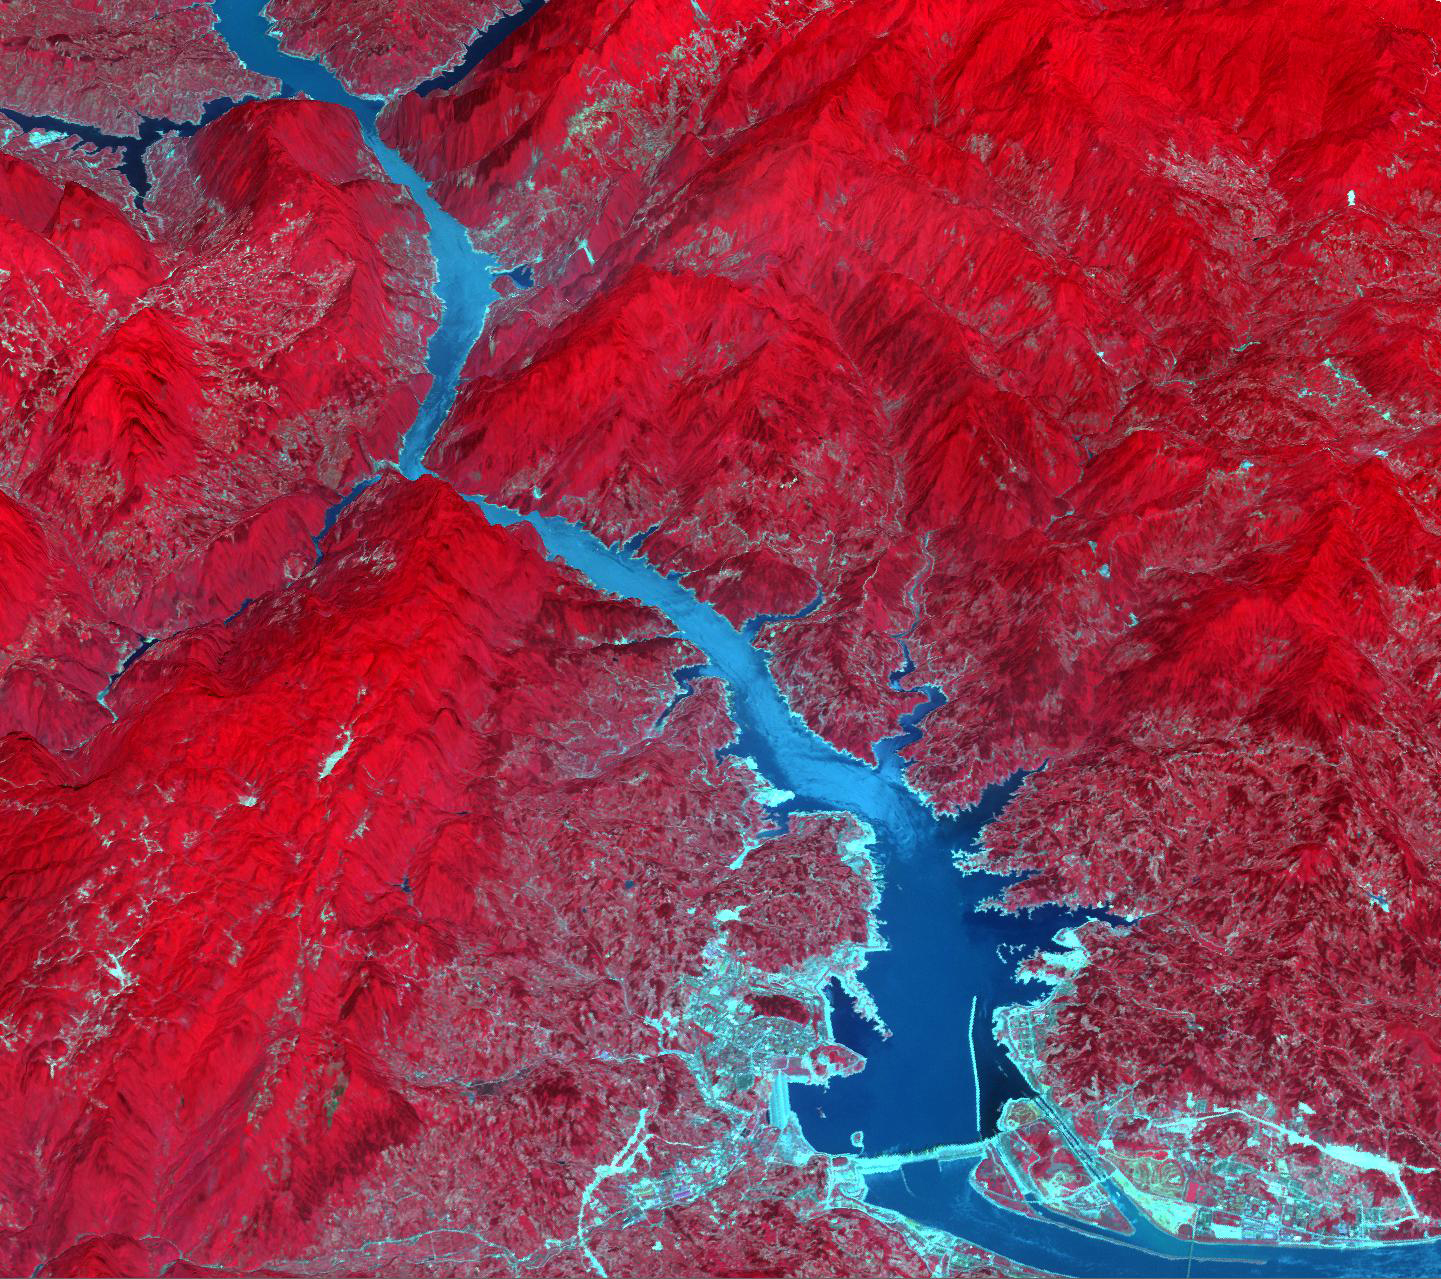 The Three Gorges Dam spans the Yangtze River in east-central China. Since its completion in 2008, over 1.3 million people were relocated; 13 cities, 140 towns, and 1350 villages were submerged; and the cost of the project exceeded $40 billion. Vegetation appears red at the near-infrared wavelengths captured here. The image was acquired June 24, 2009.